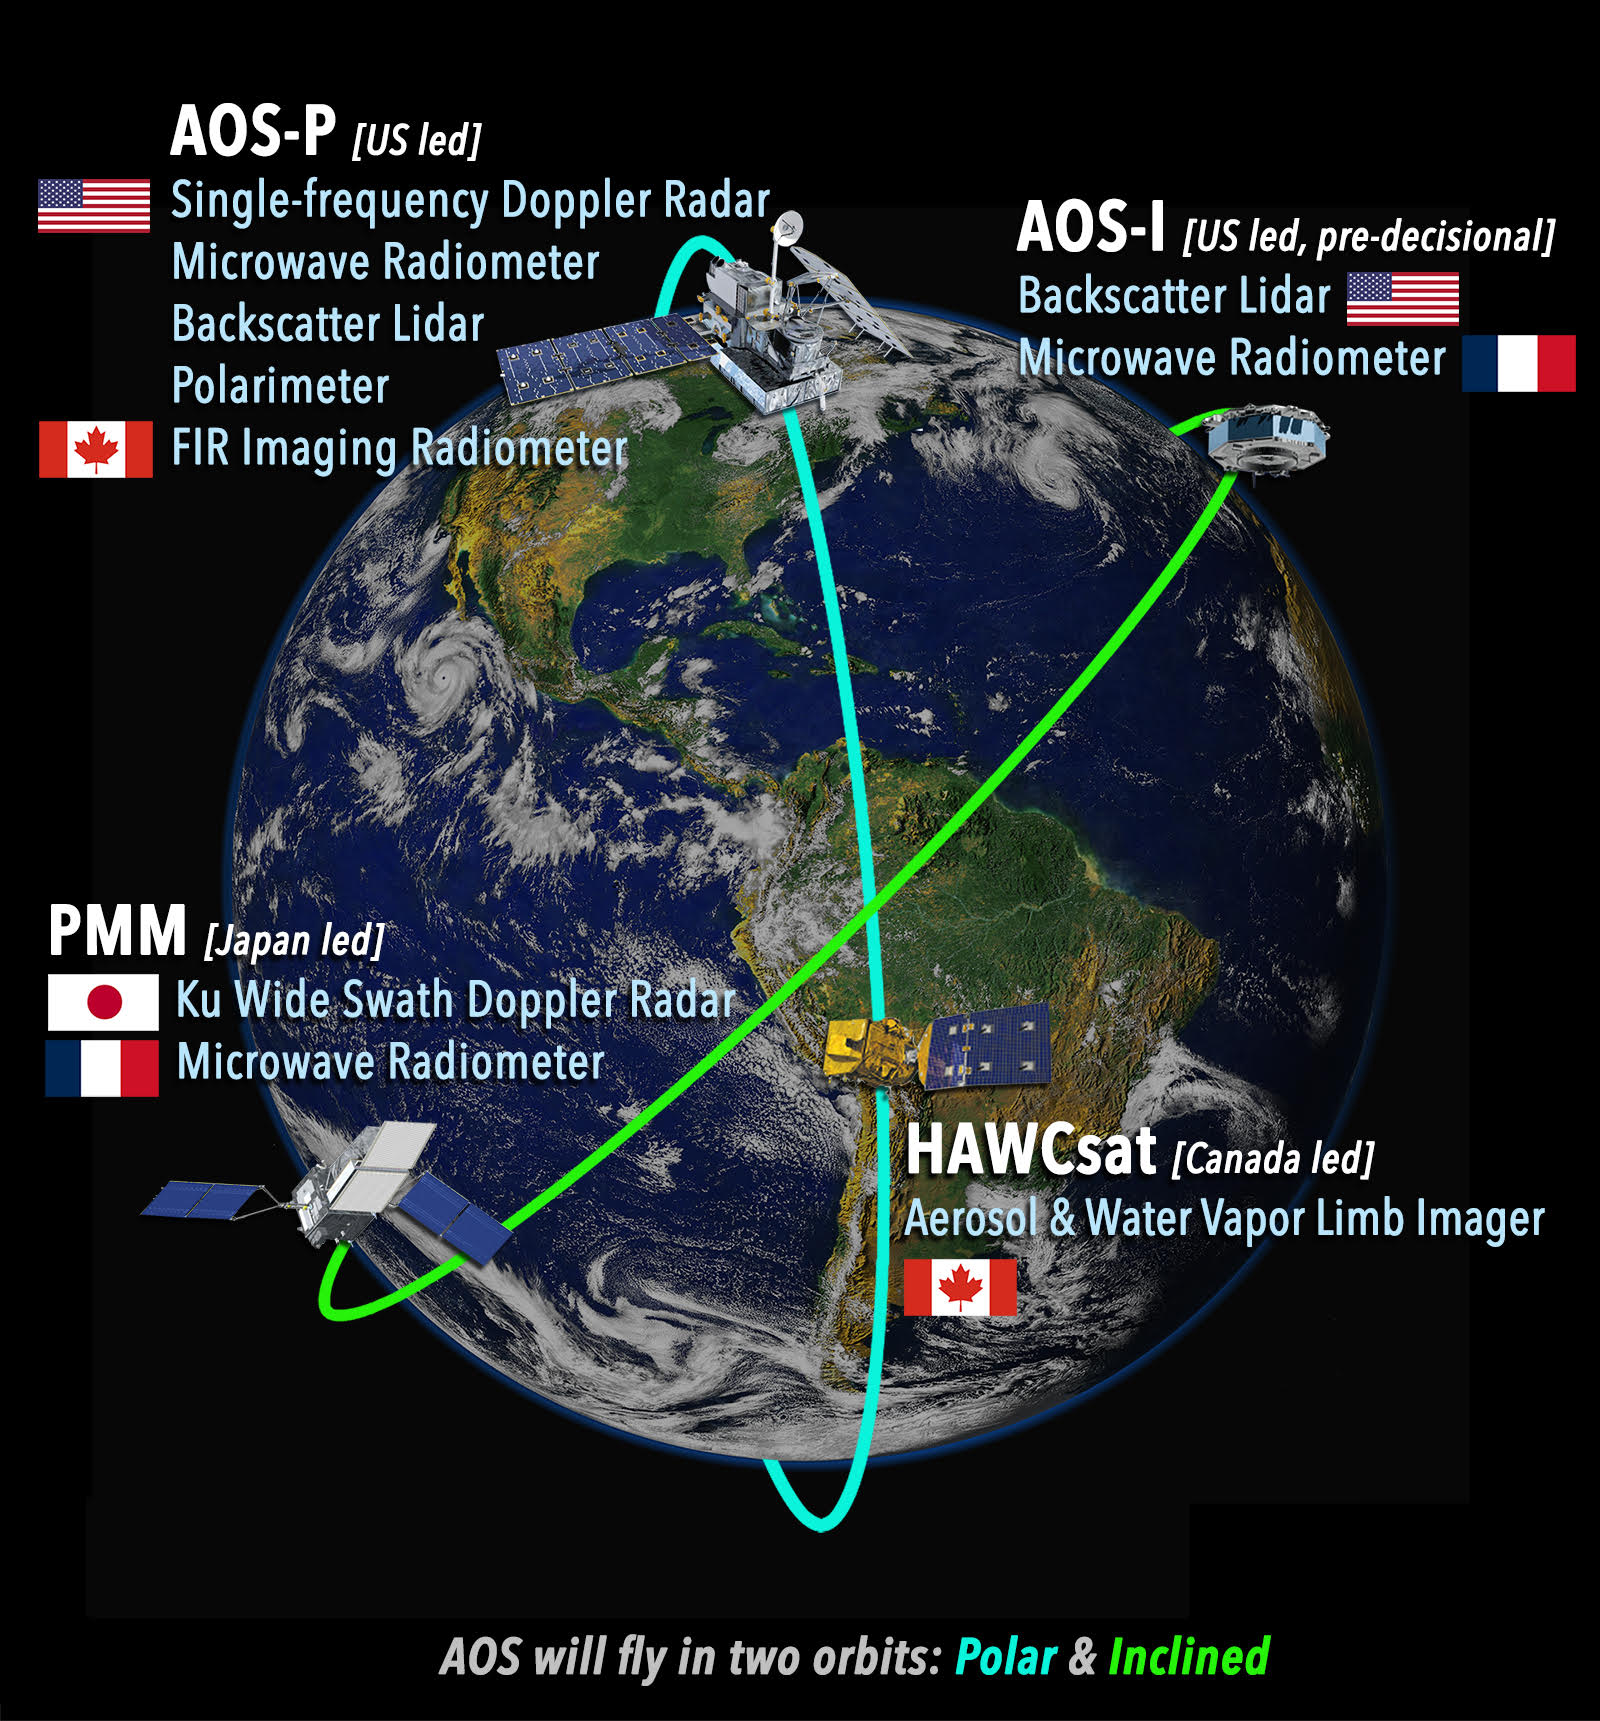 Image shows satellite systems AOS-P, AOS-I, PMM, and HAWCsat circulating around the globe